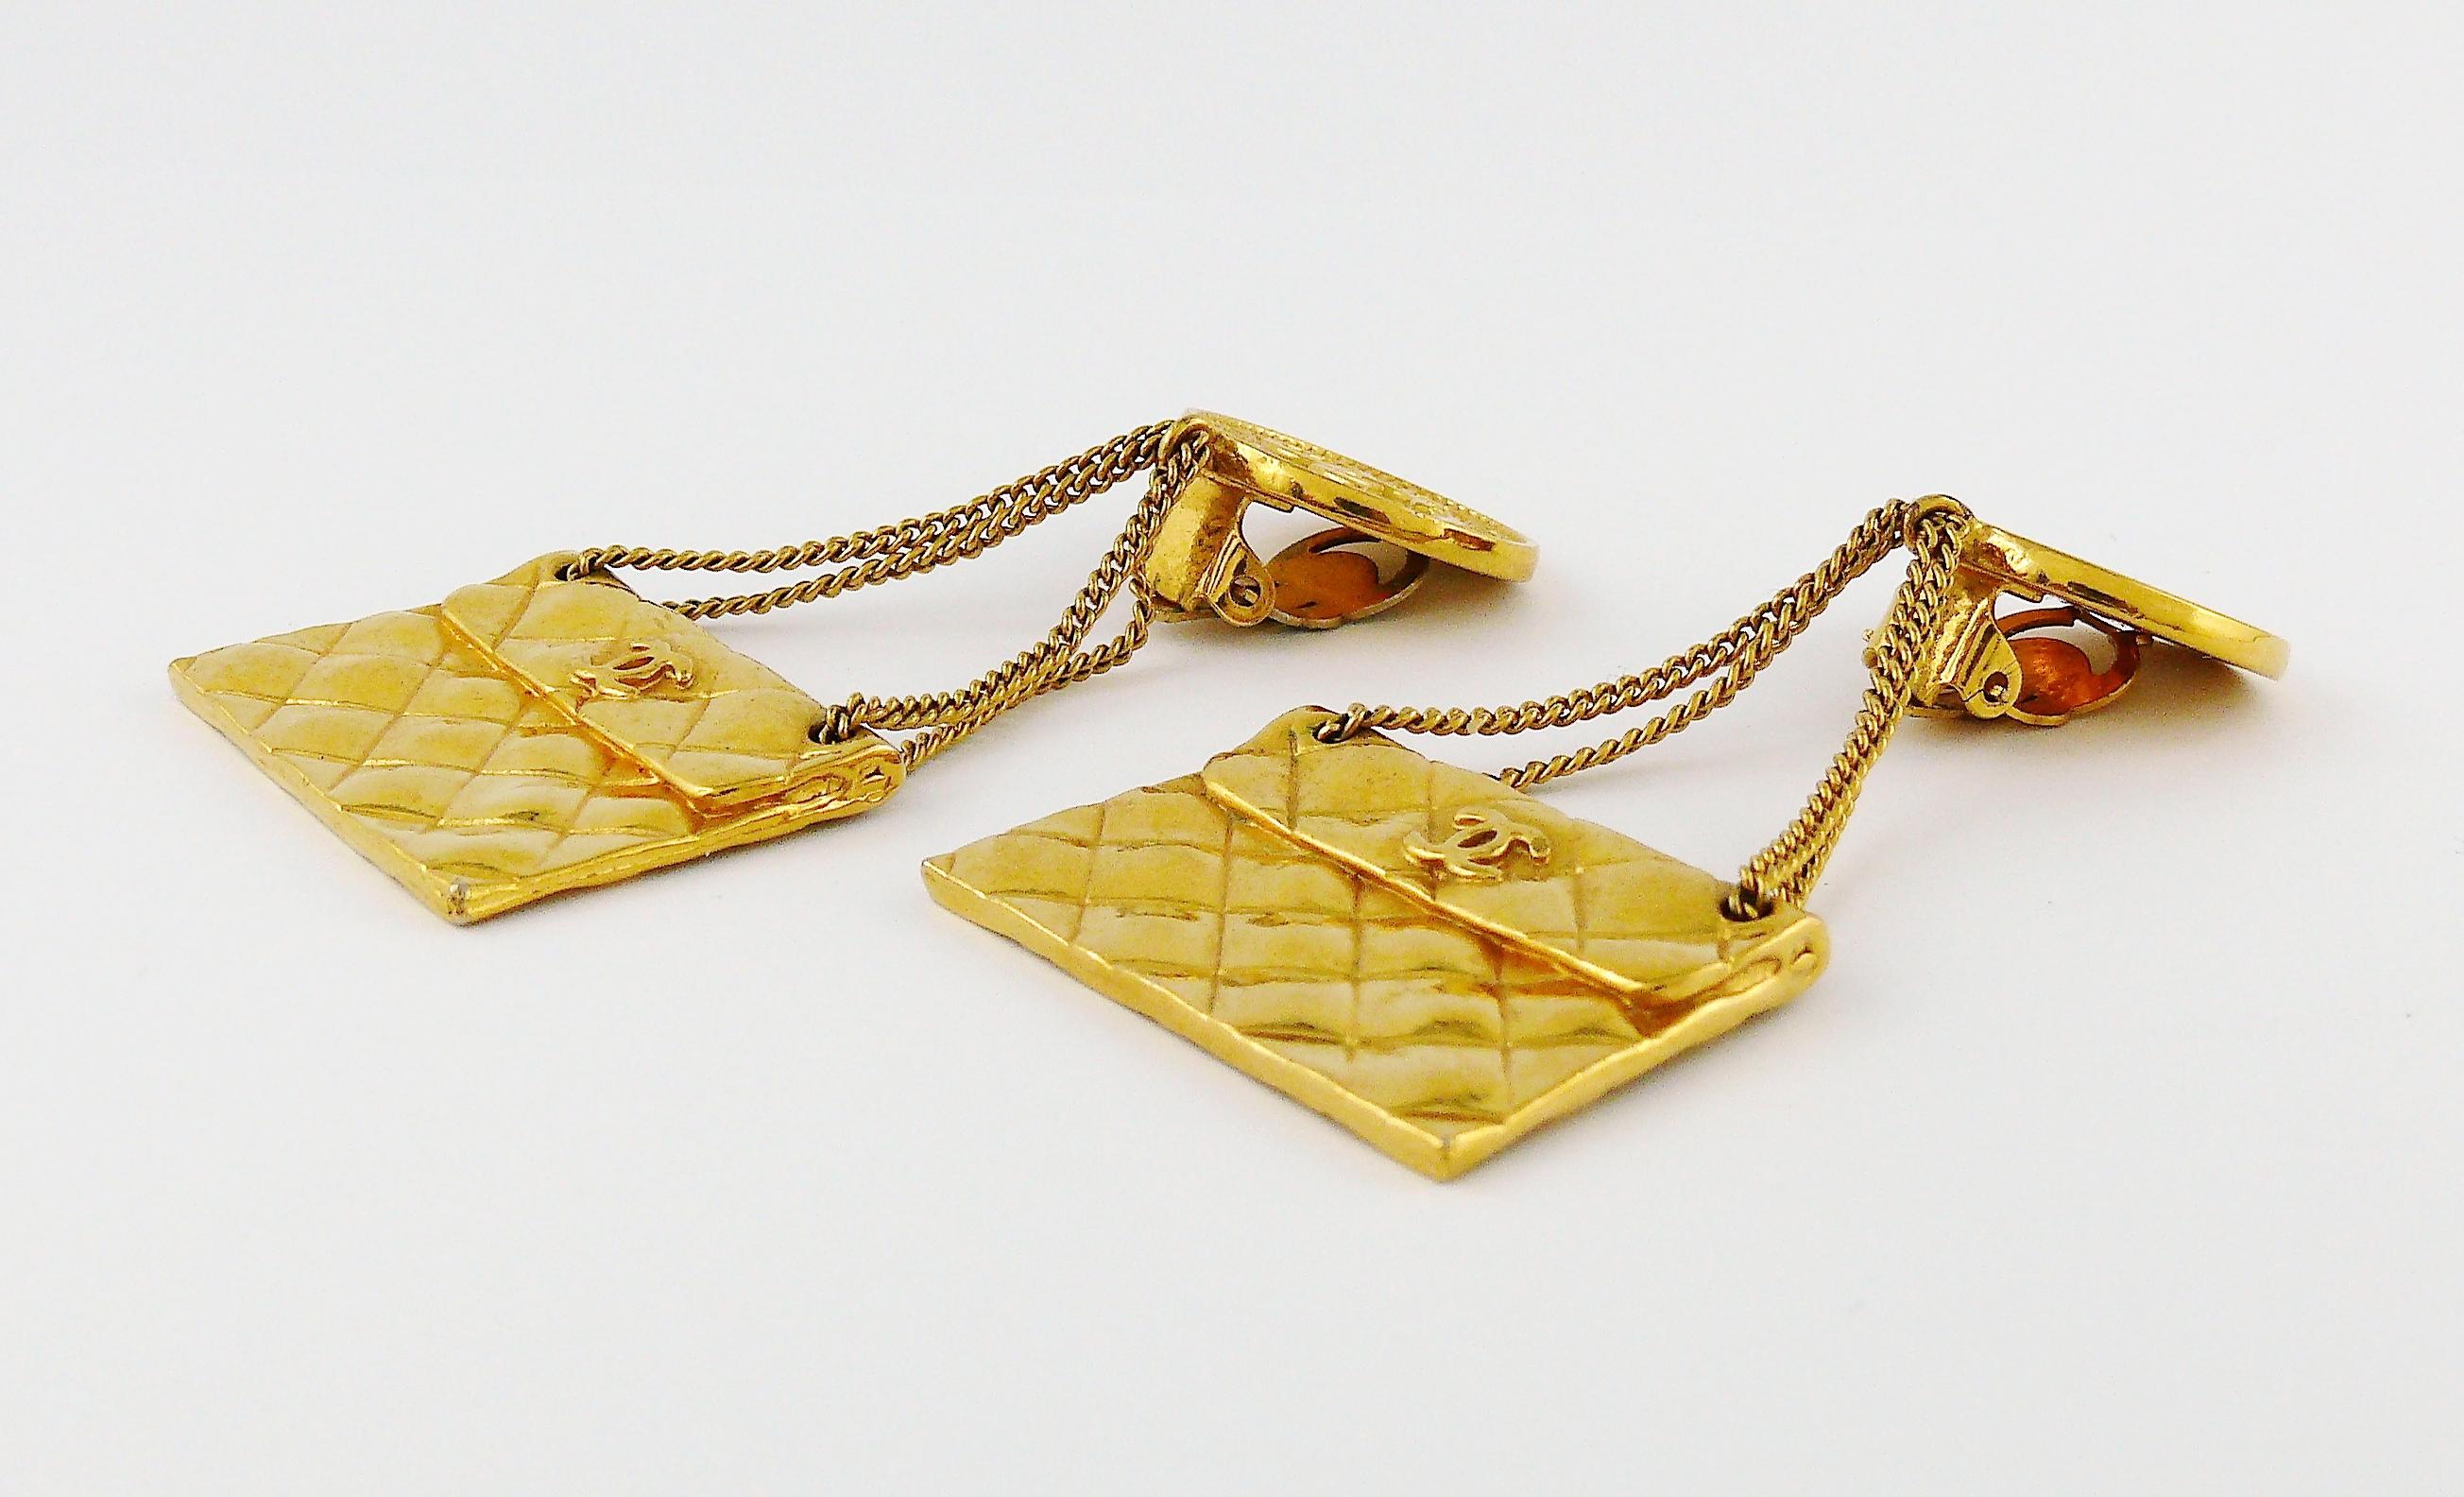 Women's Chanel Vintage Gold Toned Quilted Flap Bag Iconic Dangling Earrings